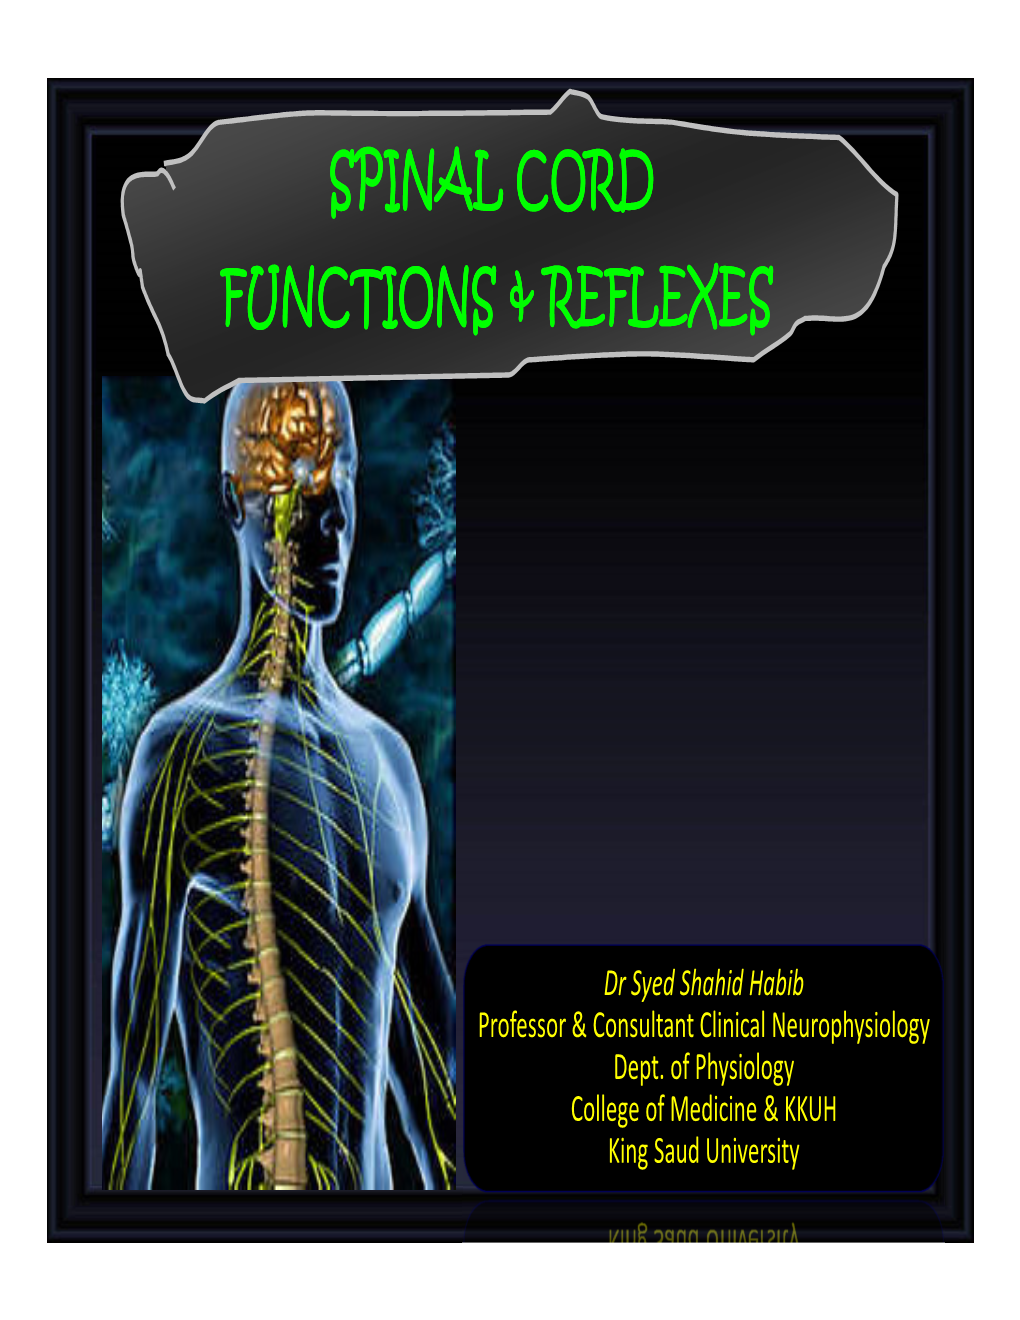 Spinal Cord Functions & Reflexes